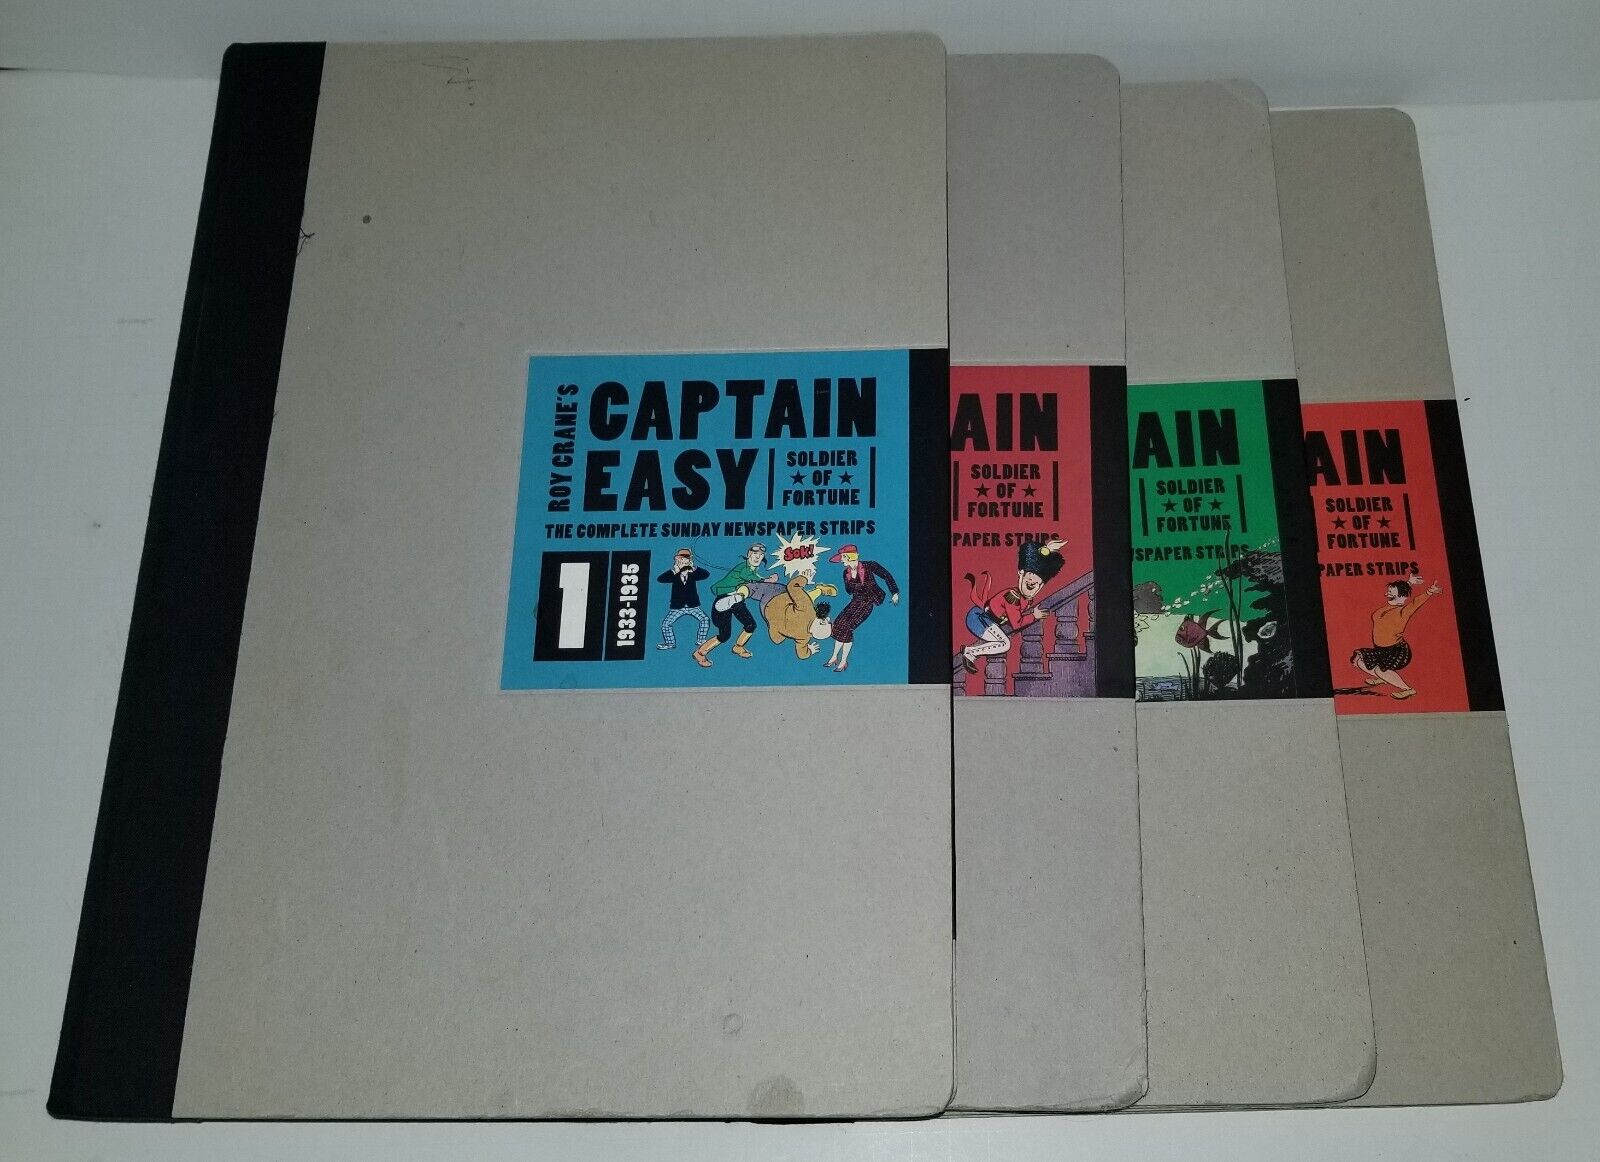 Captain Easy, Soldier of Fortune, Complete Sunday Newspaper Strips Volumes 1-4